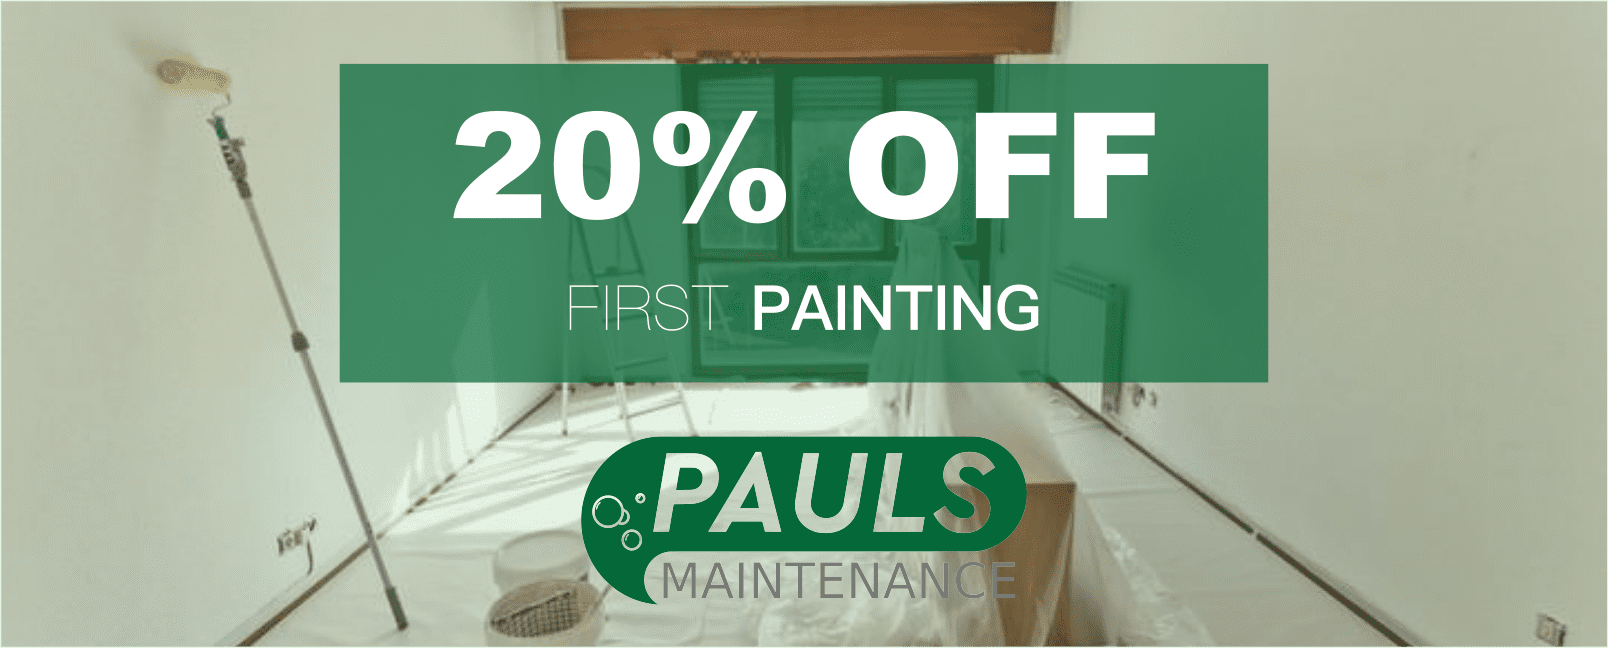 First Painting 20% OFF Pauls Clean King Pauls Clean King Gold Coast Cleaning Services